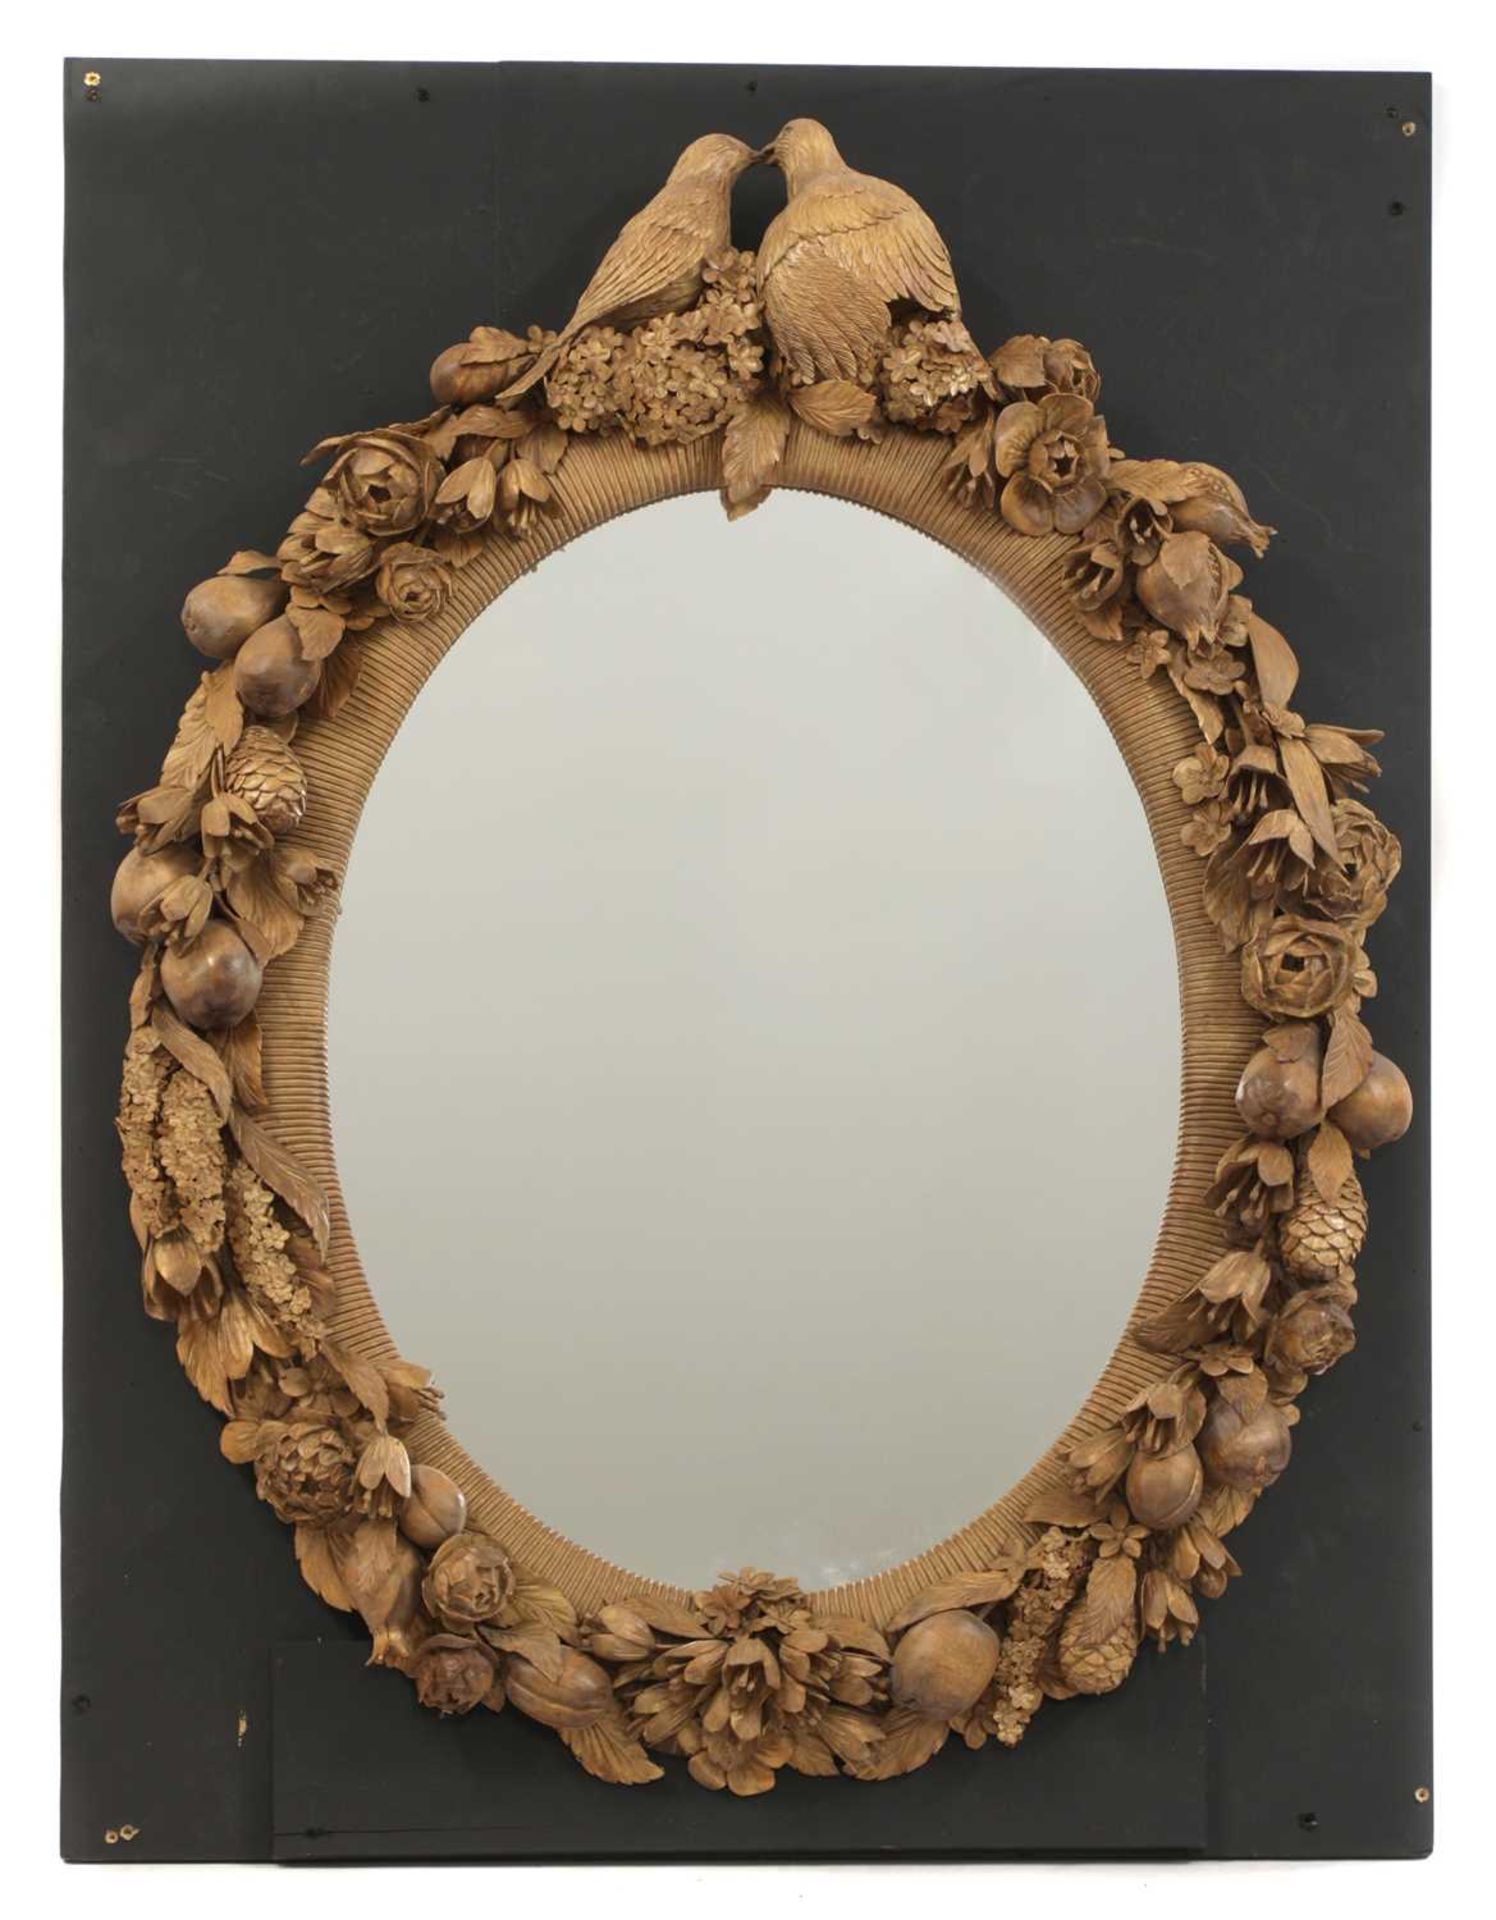 An ornately carved mirror in the style of Grinling Gibbons,